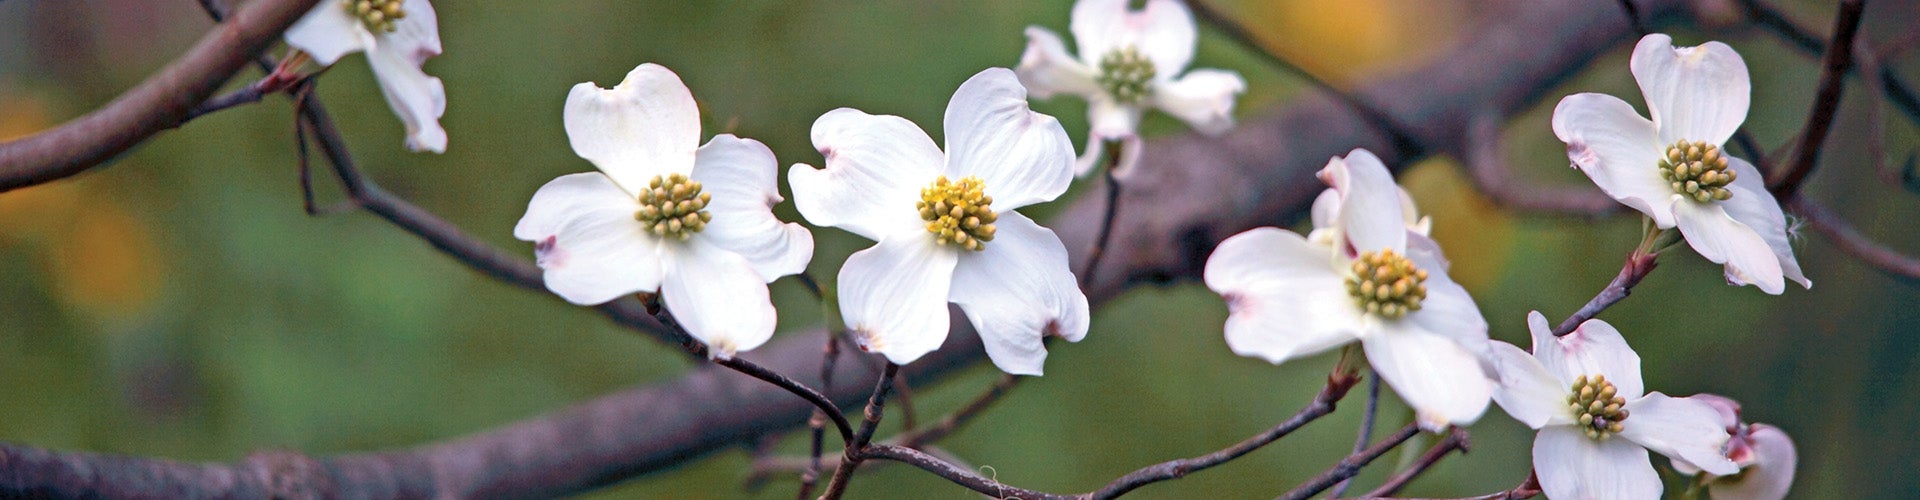 White and yellow four-petal flowers growing on a dogwood tree.